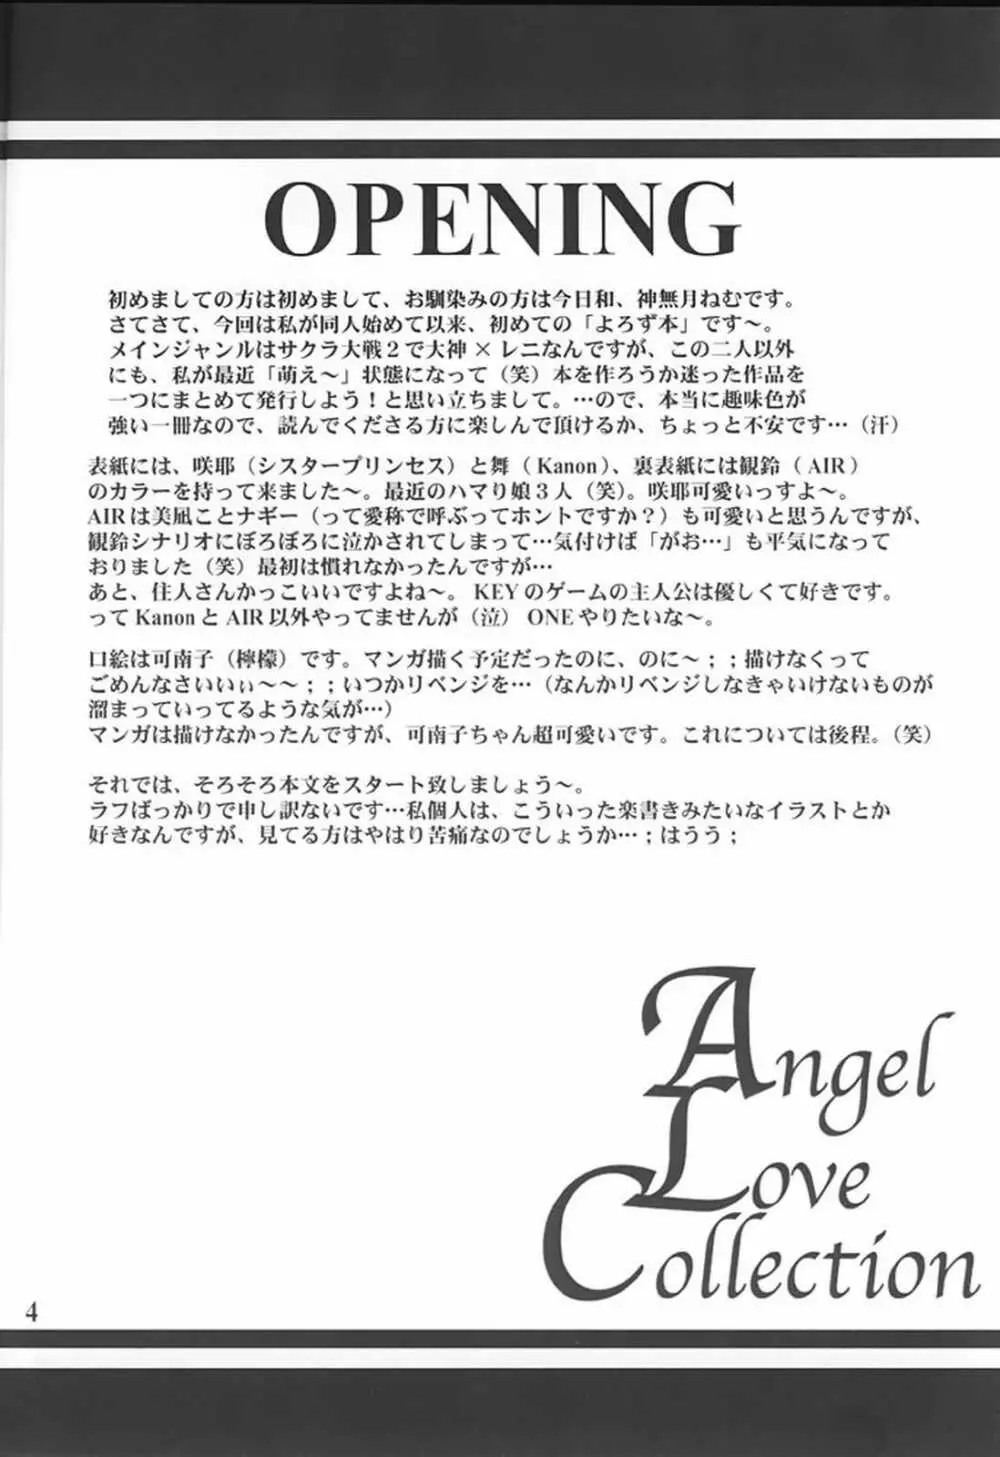 Angel Love Collection - page4